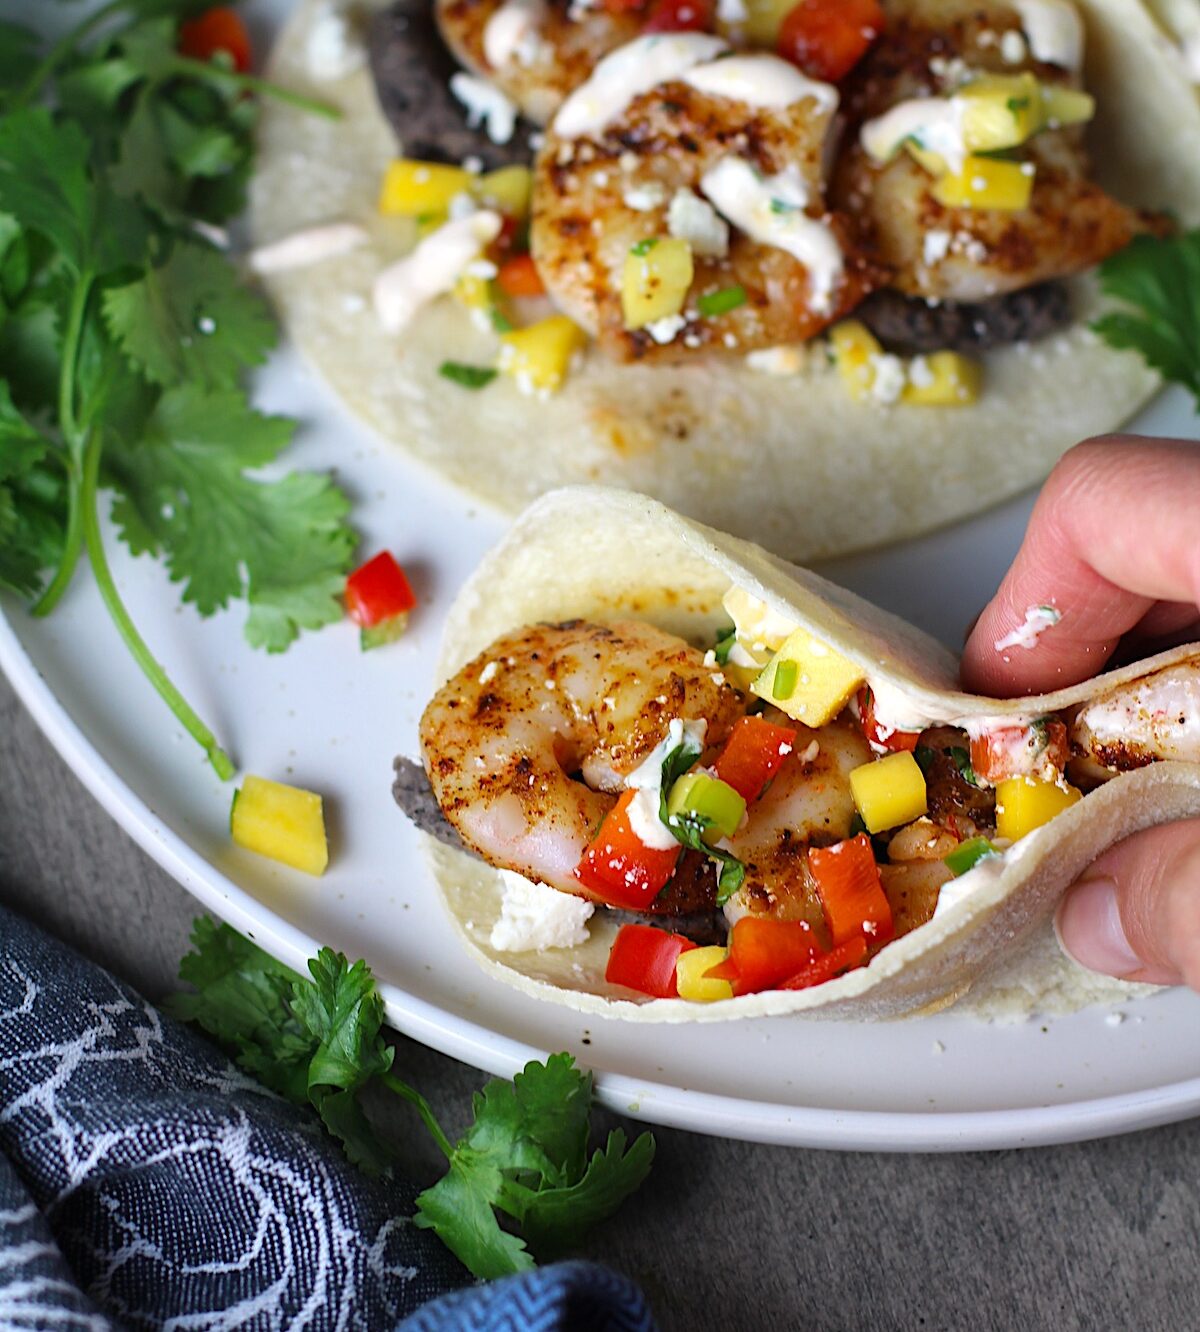 Hand holding a grilled Shrimp Taco in corn tortillas on a plate with Mango Salsa & Chipotle Crema. On the side are bowls of cotija cheese, crema, salsa, and cilantro leaves.